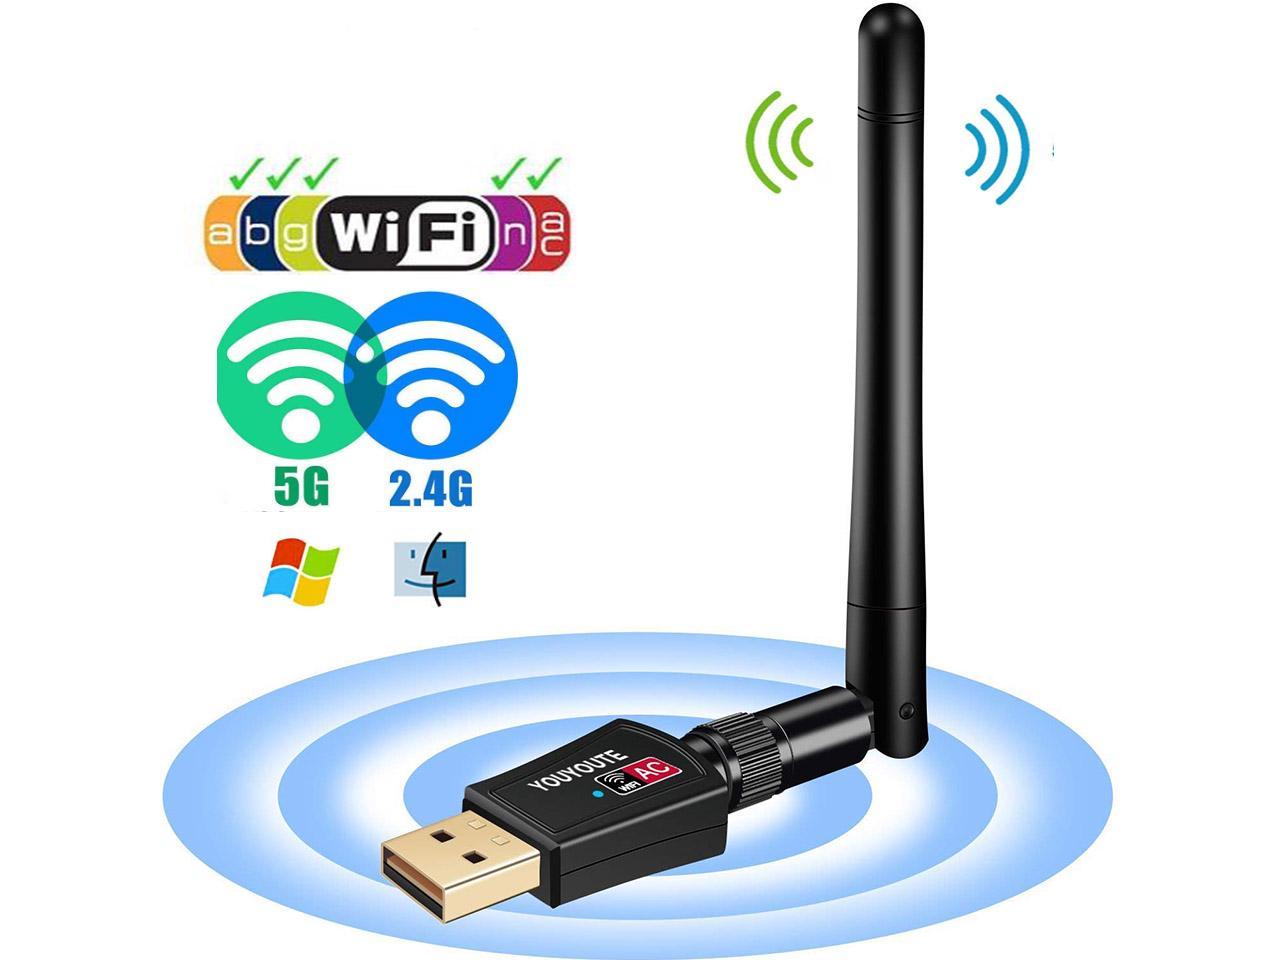 600Mbps Dual Band USB WiFi Dongle Wireless LAN Adapter 802.11AC/A/B/G/N 5/2.4Ghz 